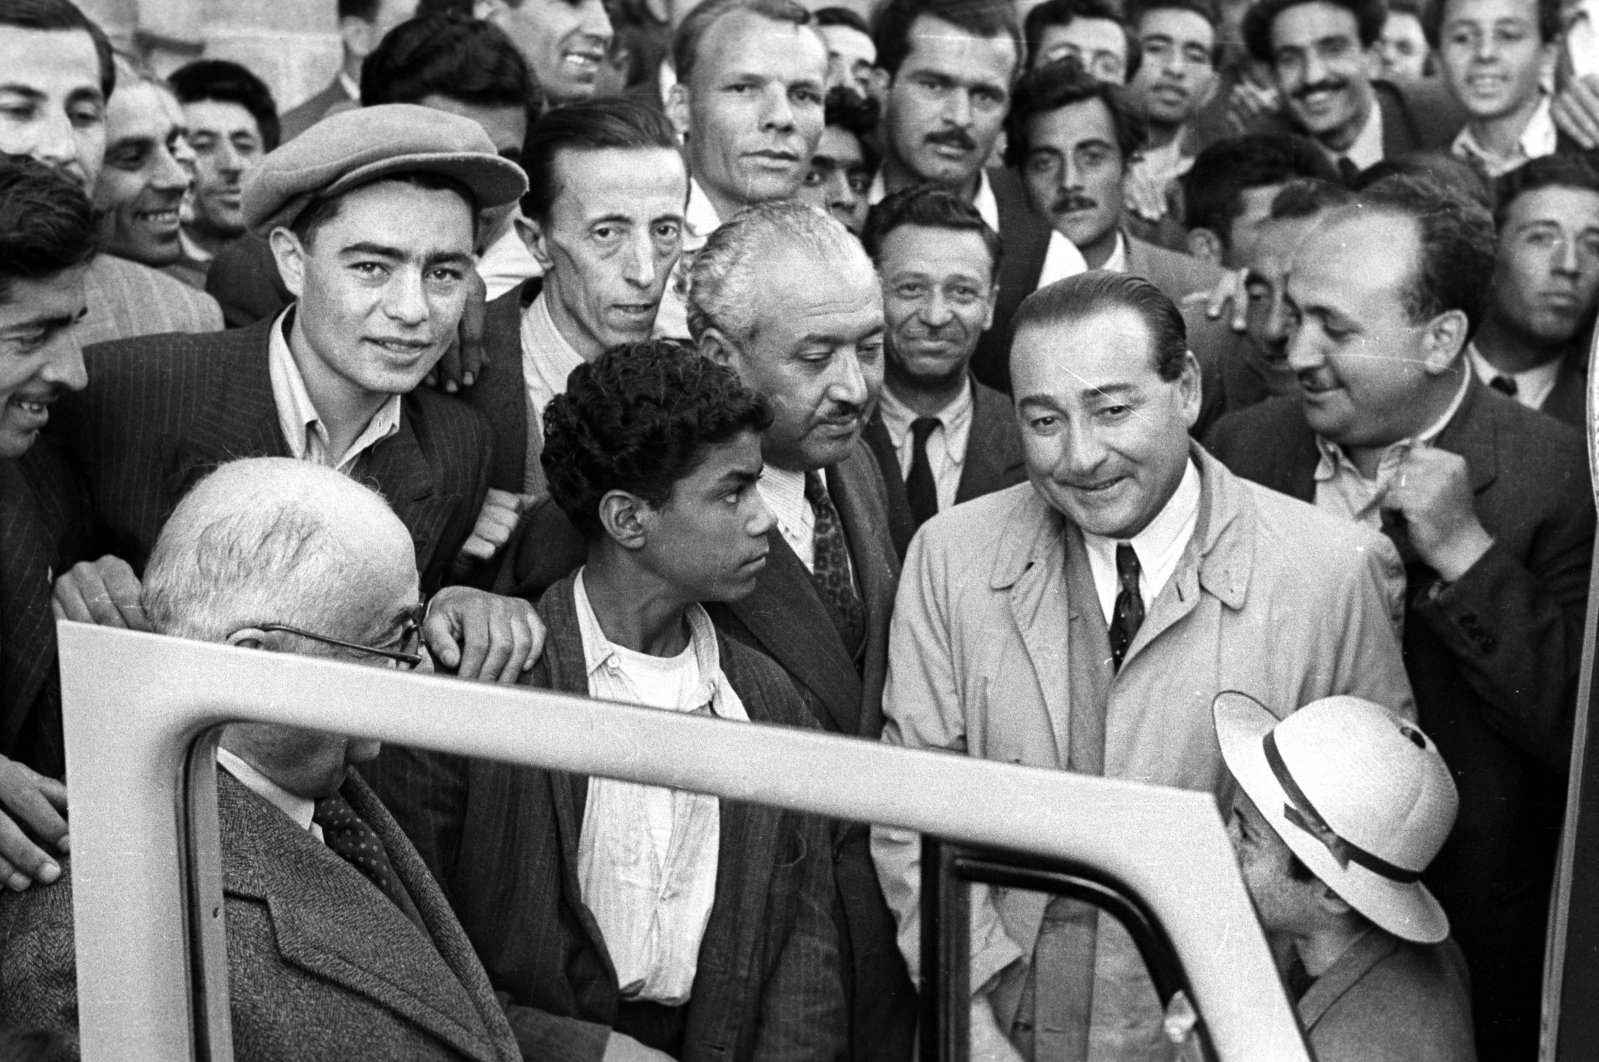 An archive photo of Prime Minister Adnan Menderes and his entourage setting out for the Ankara Provincial Administrative Board building after their election win was confirmed, Ankara, Türkiye, May 15, 1950. (Sabah Photo)